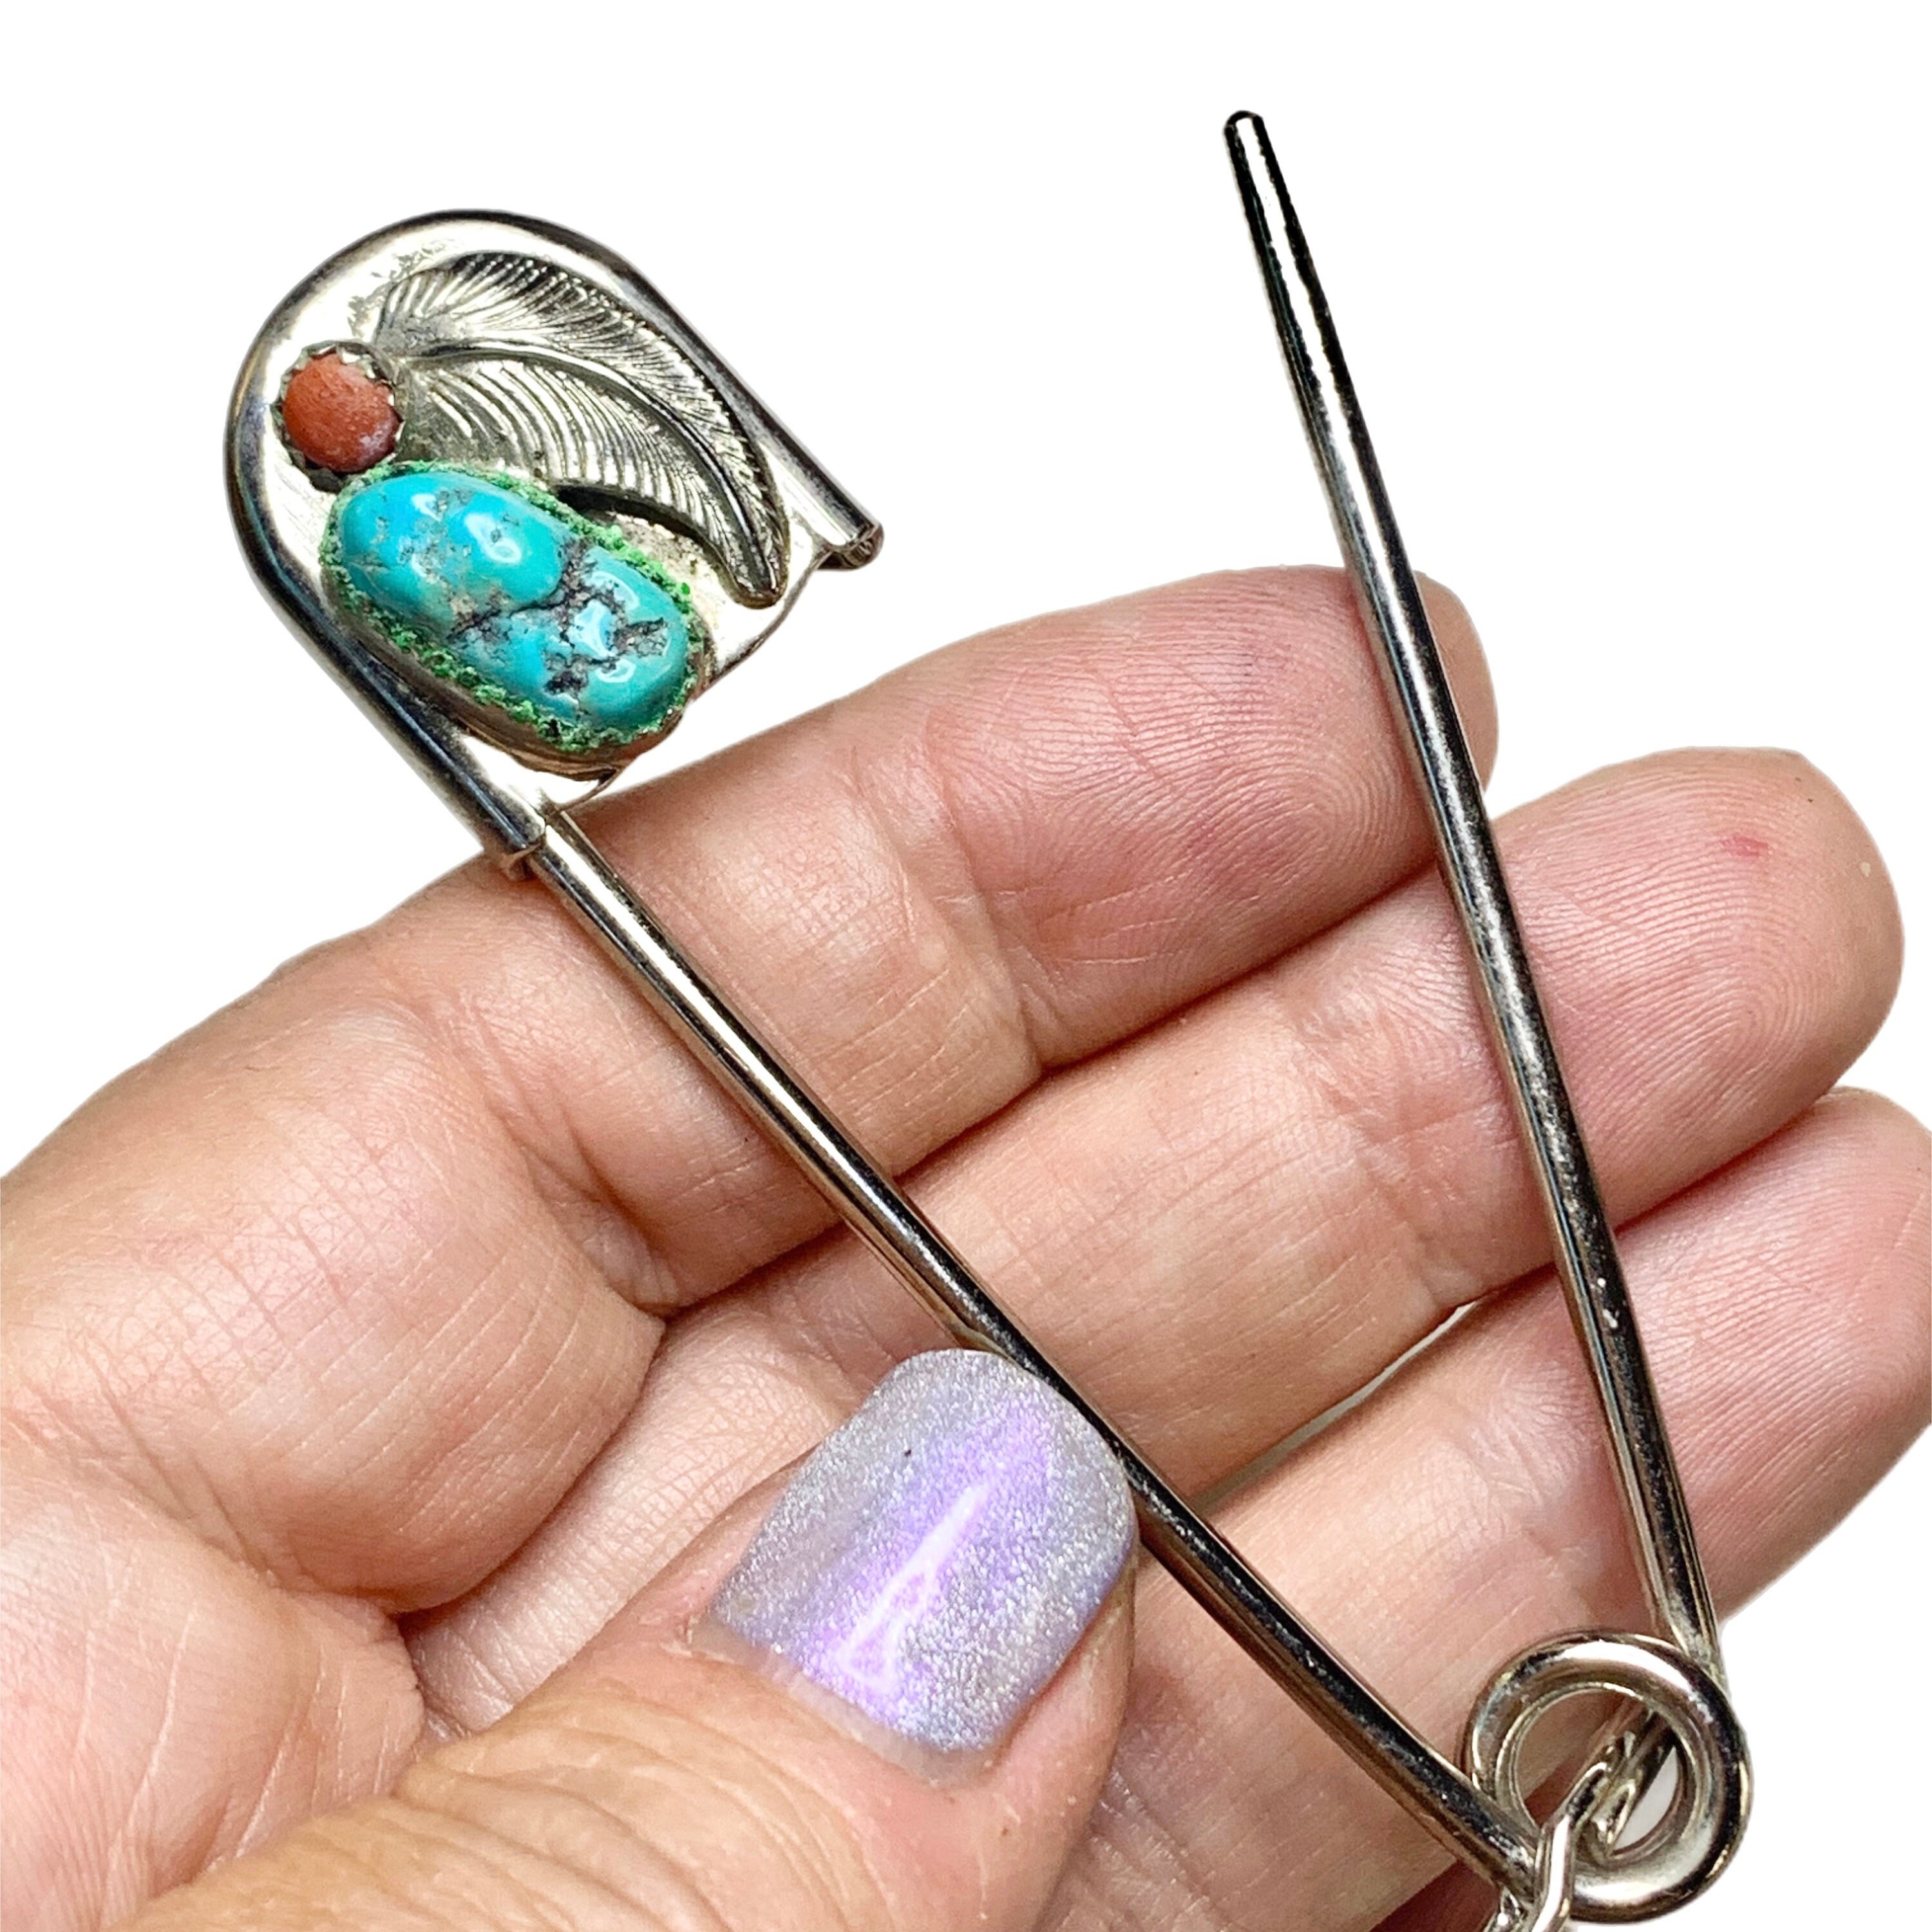 Buy Turquoise Pins Men Online In India - Etsy India